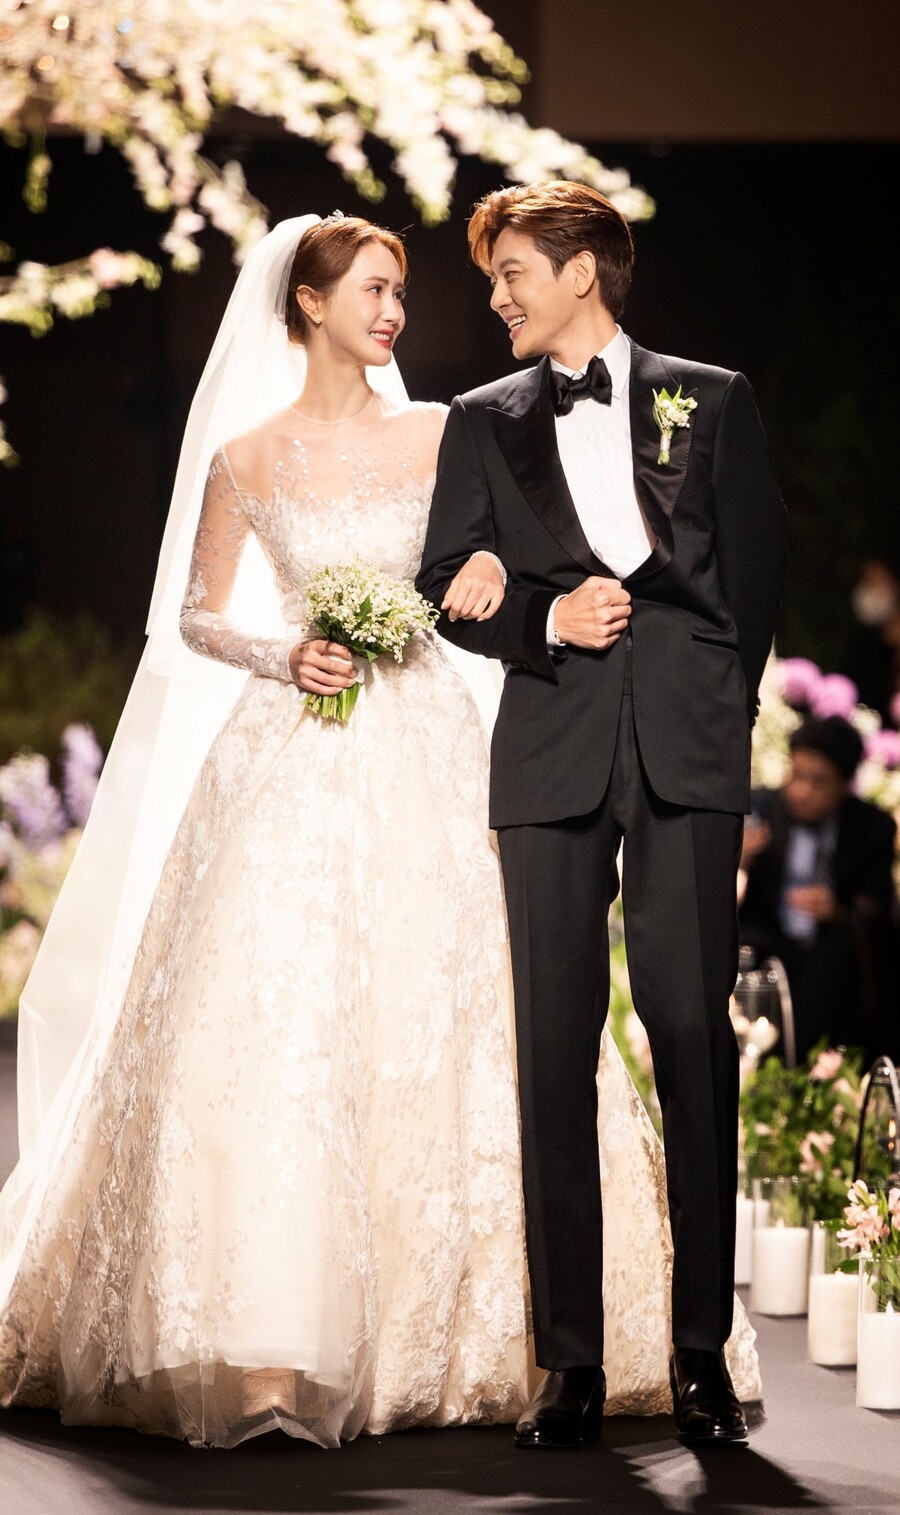 Marriage Se7en♥ Lee Da Hae Official Photos Released A Beautiful Couple Walking On A Flower